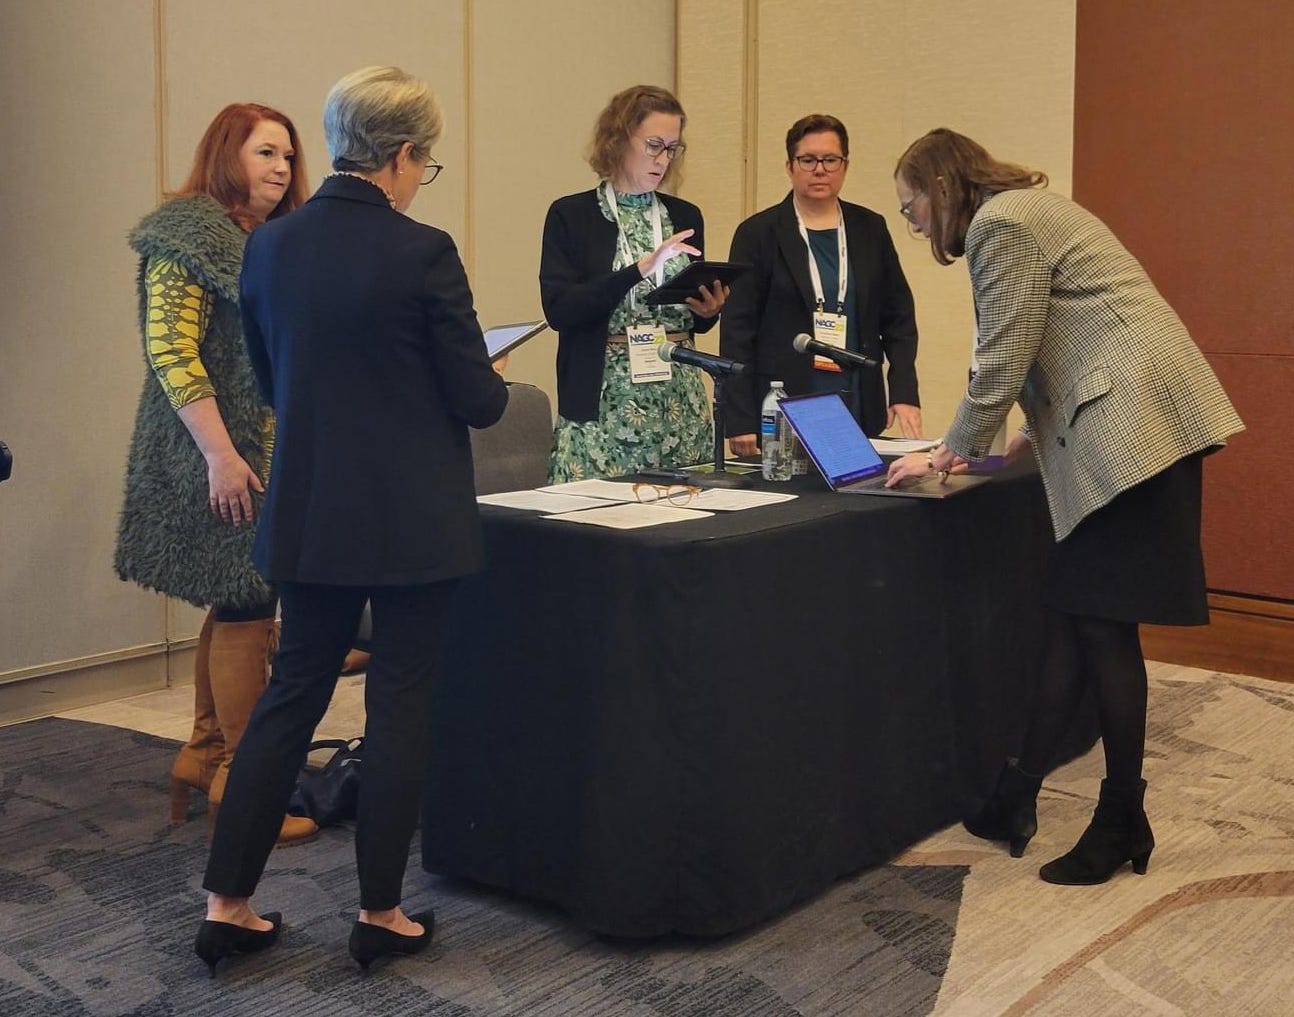 Image description: Erin Miller, Lauri Kirsch, Anne Rinn, Chris Wells, and Shelagh Gallagher stand around a table preparing for the OE session to begin. 